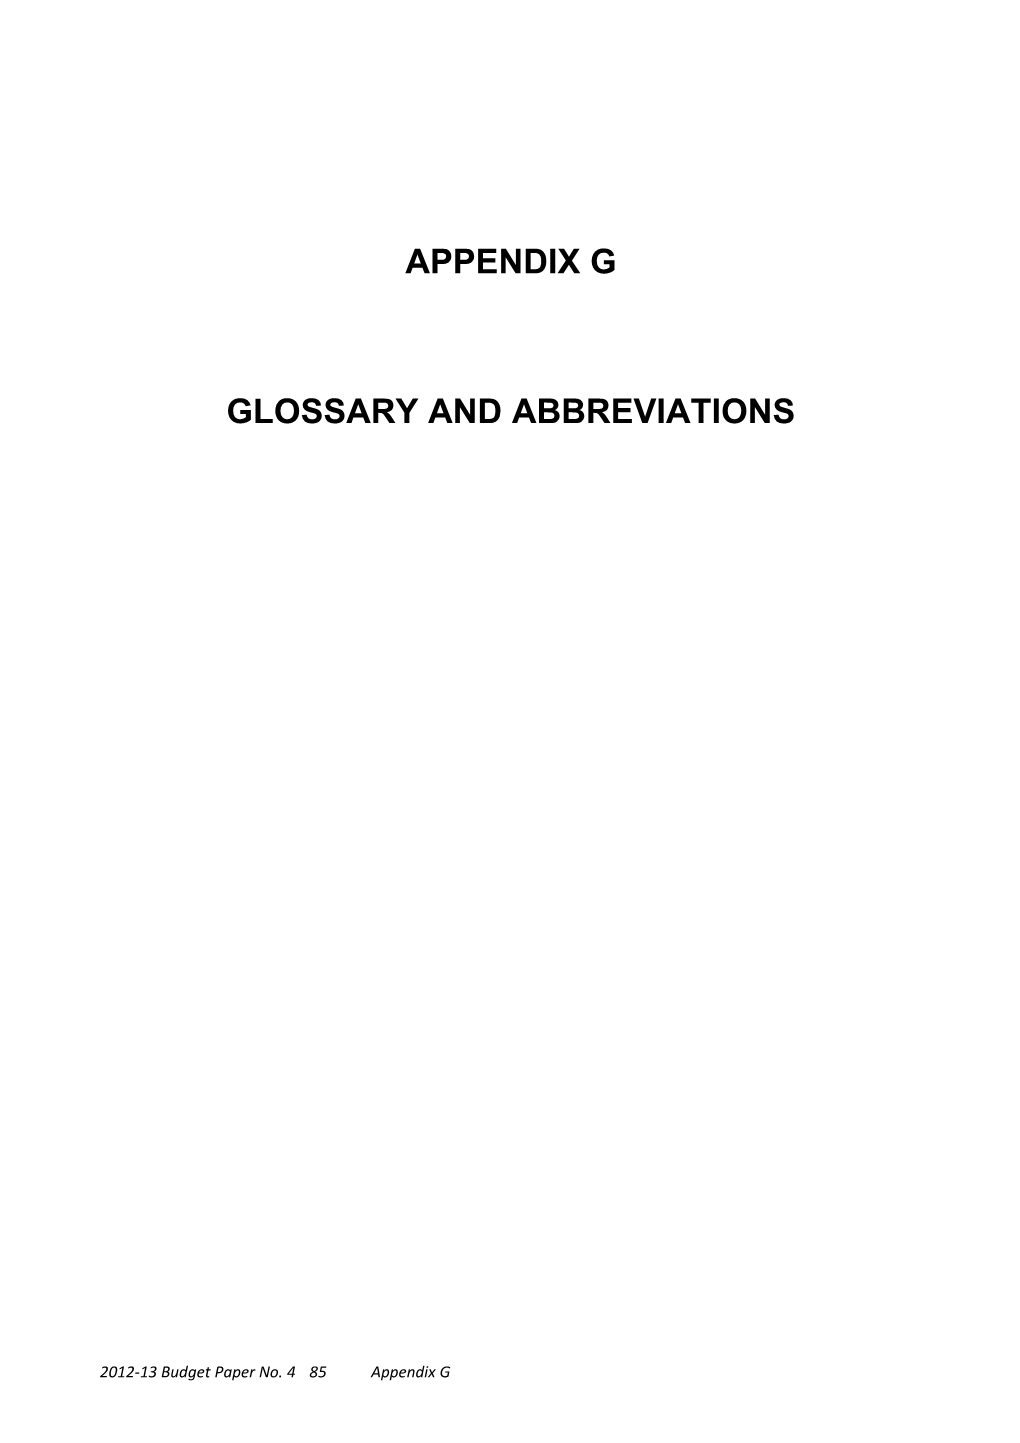 Glossary and Abbreviations for 2006-07 Budget Papers